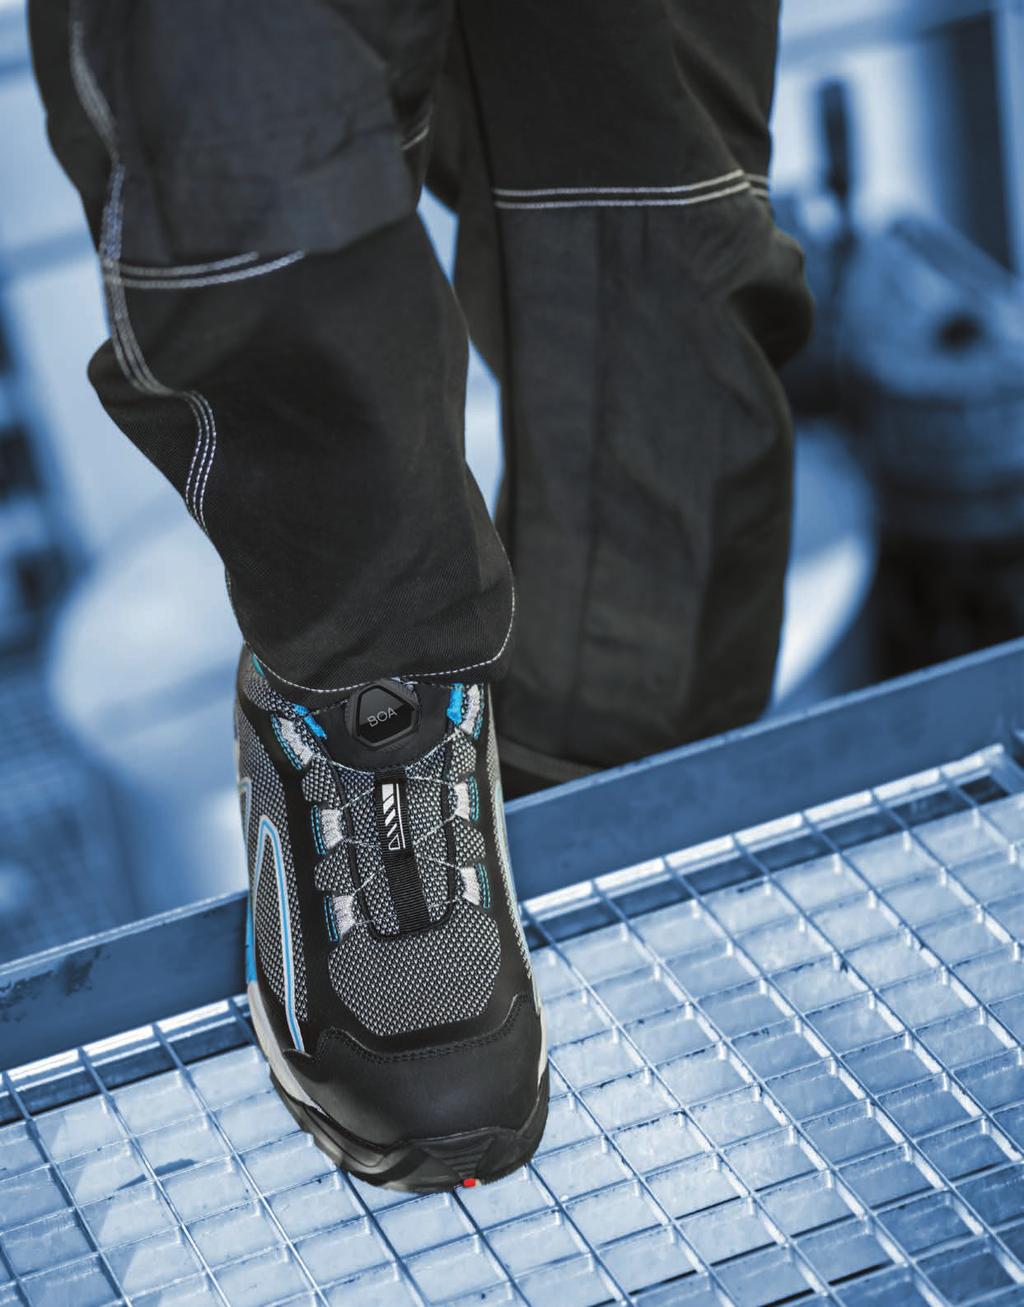 11 TECH MOVES US Dutch designed, EVOKE shoes feature our prestigious Walkline Evo system, including Tunnelsystem and Flexlines.